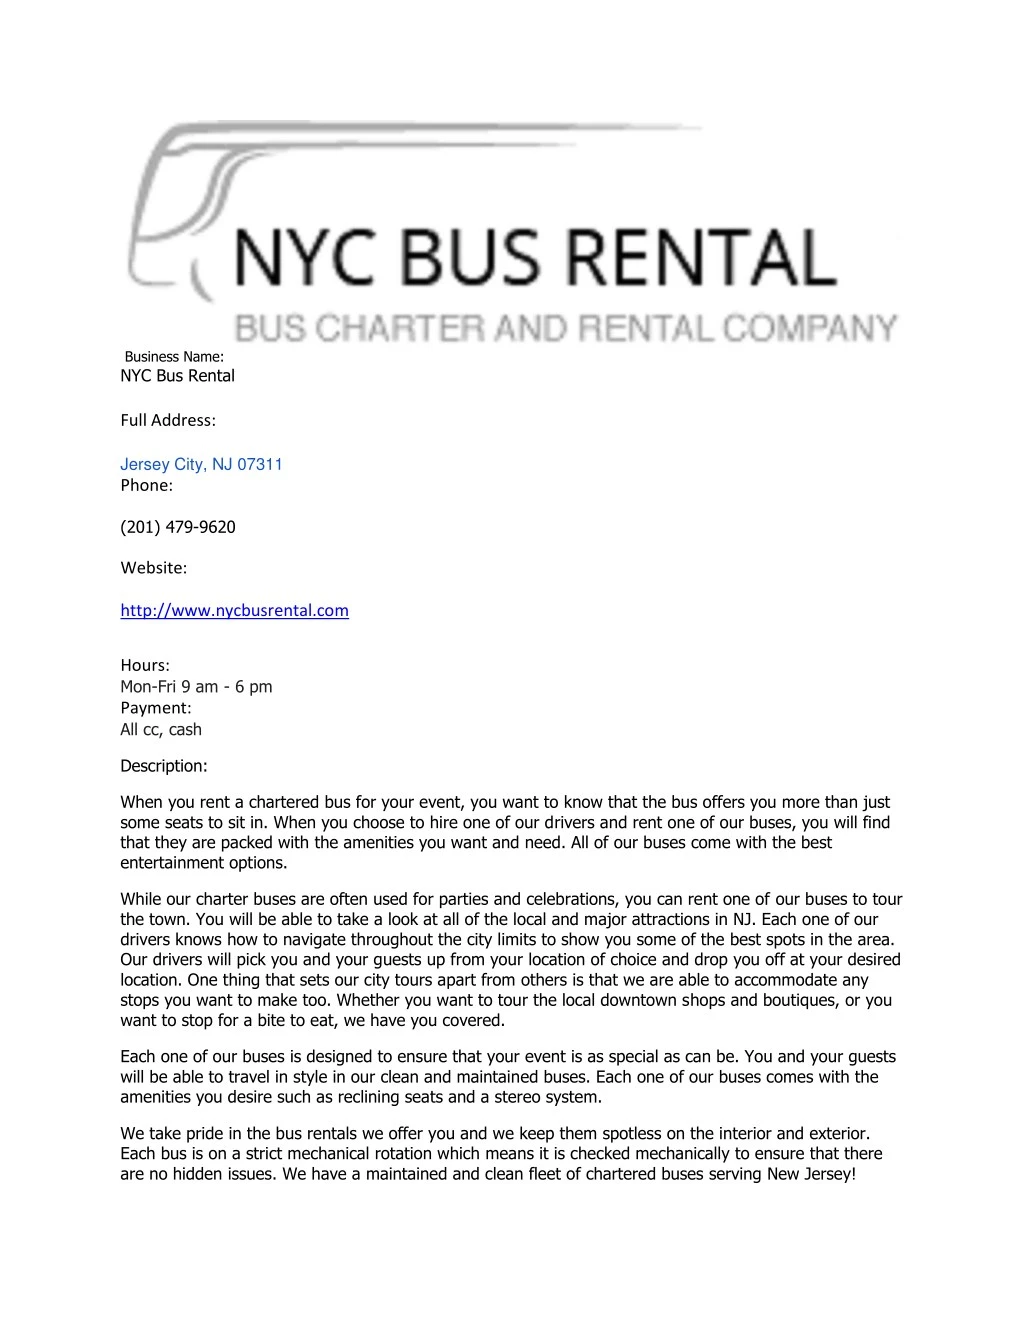 business name nyc bus rental